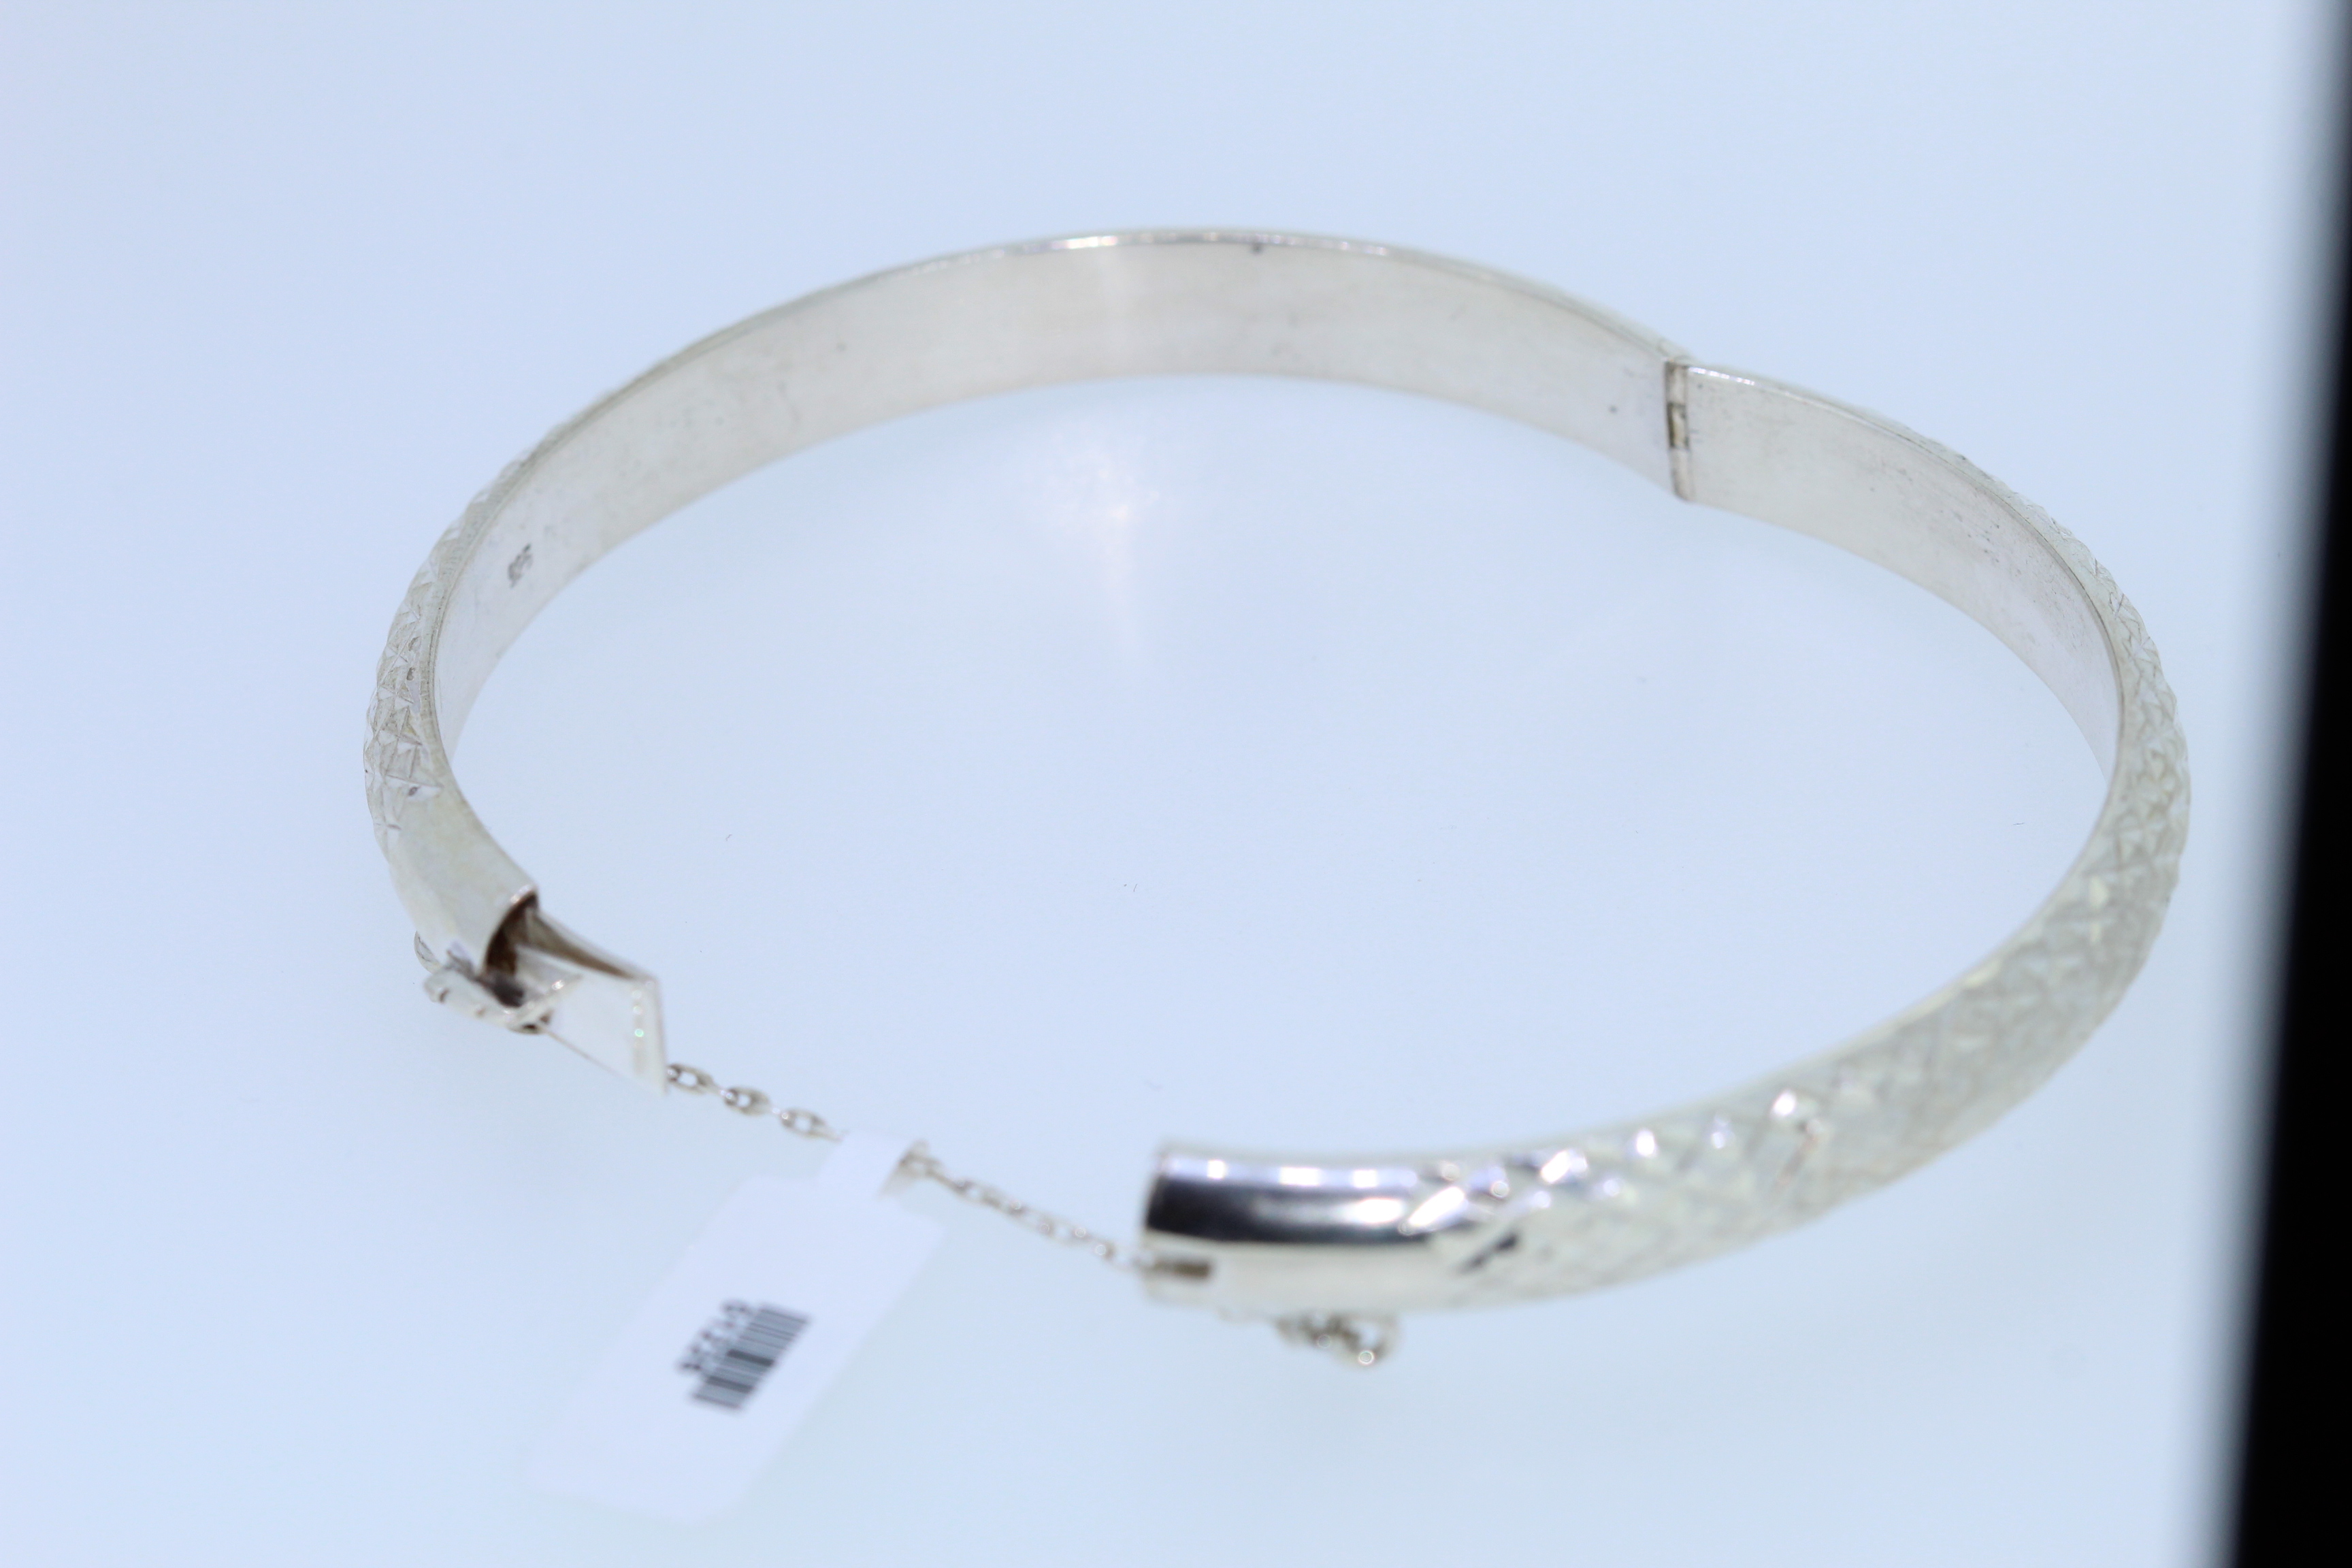 Stamped 925 Silver Etched Bangle - Image 2 of 2